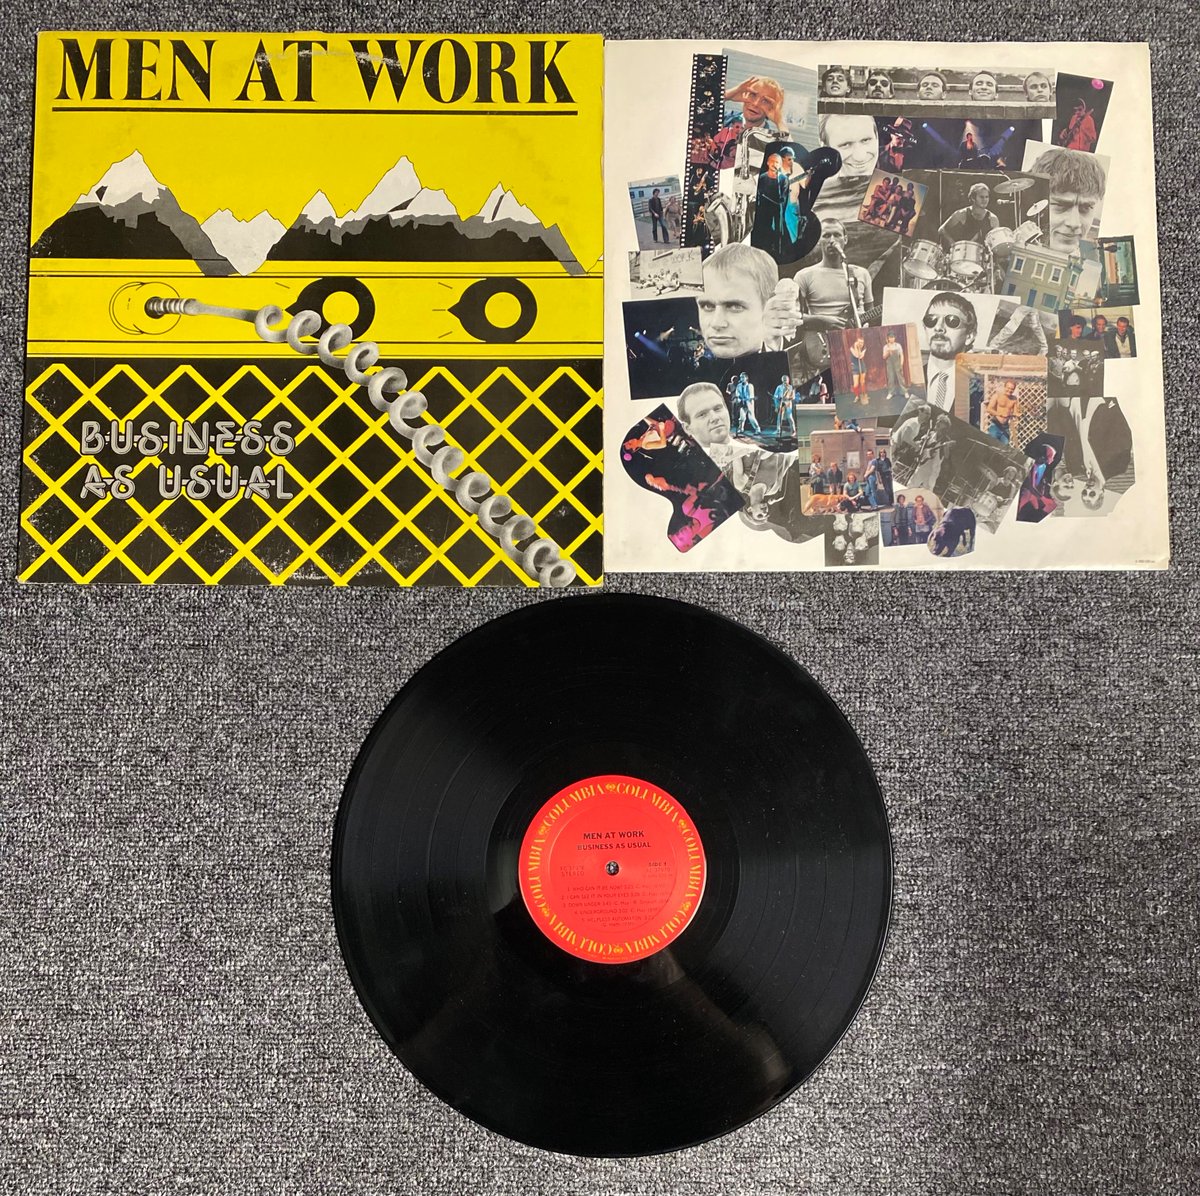 Today in 1982 the first @MenAtWorkBand album, #BusinessAsUsual already a #1 hit in their native #Australia is finally released in #America Do you own this album on #CD #Cassette or #Vinyl ? - @JoeRockWBAB #Rock #ClassicRock #MenAtWork #RockOnRock #TodayInRock #WBAB